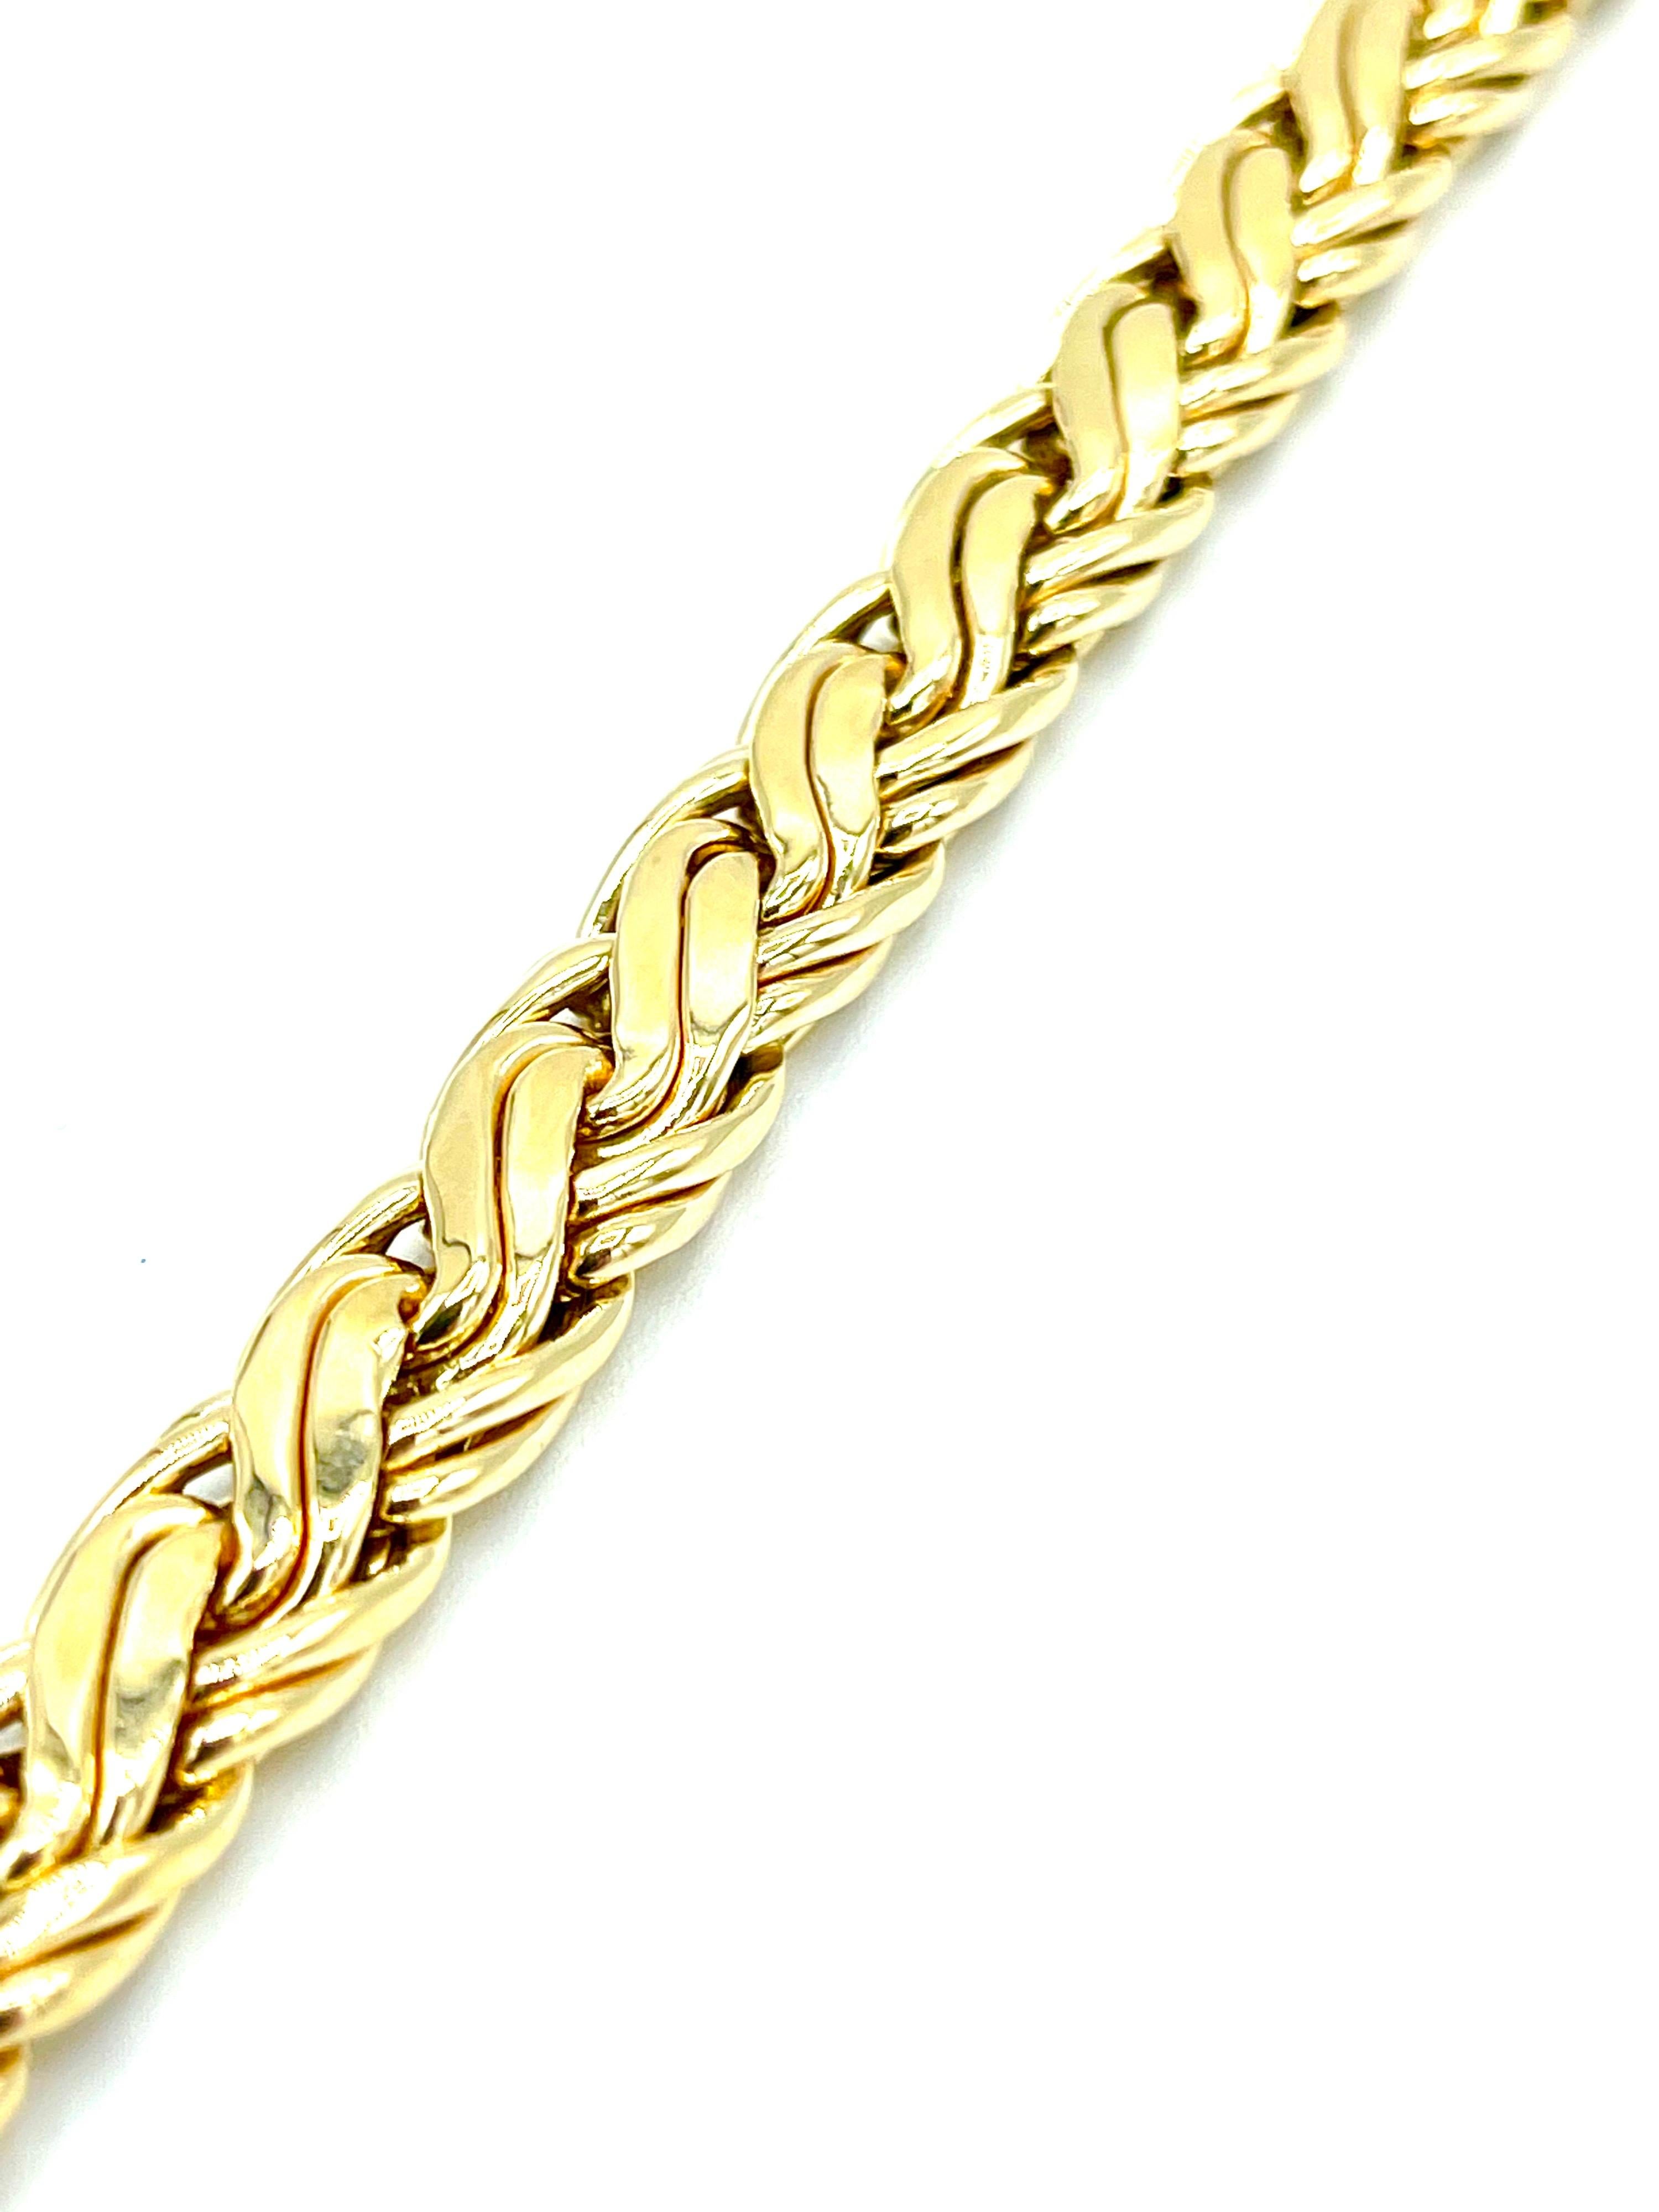 A simple and elegant Tiffany & Co. 14K yellow gold bracelet.  It is designed in a basket weave style pattern with a hidden box clasp.  The clasp is signed 